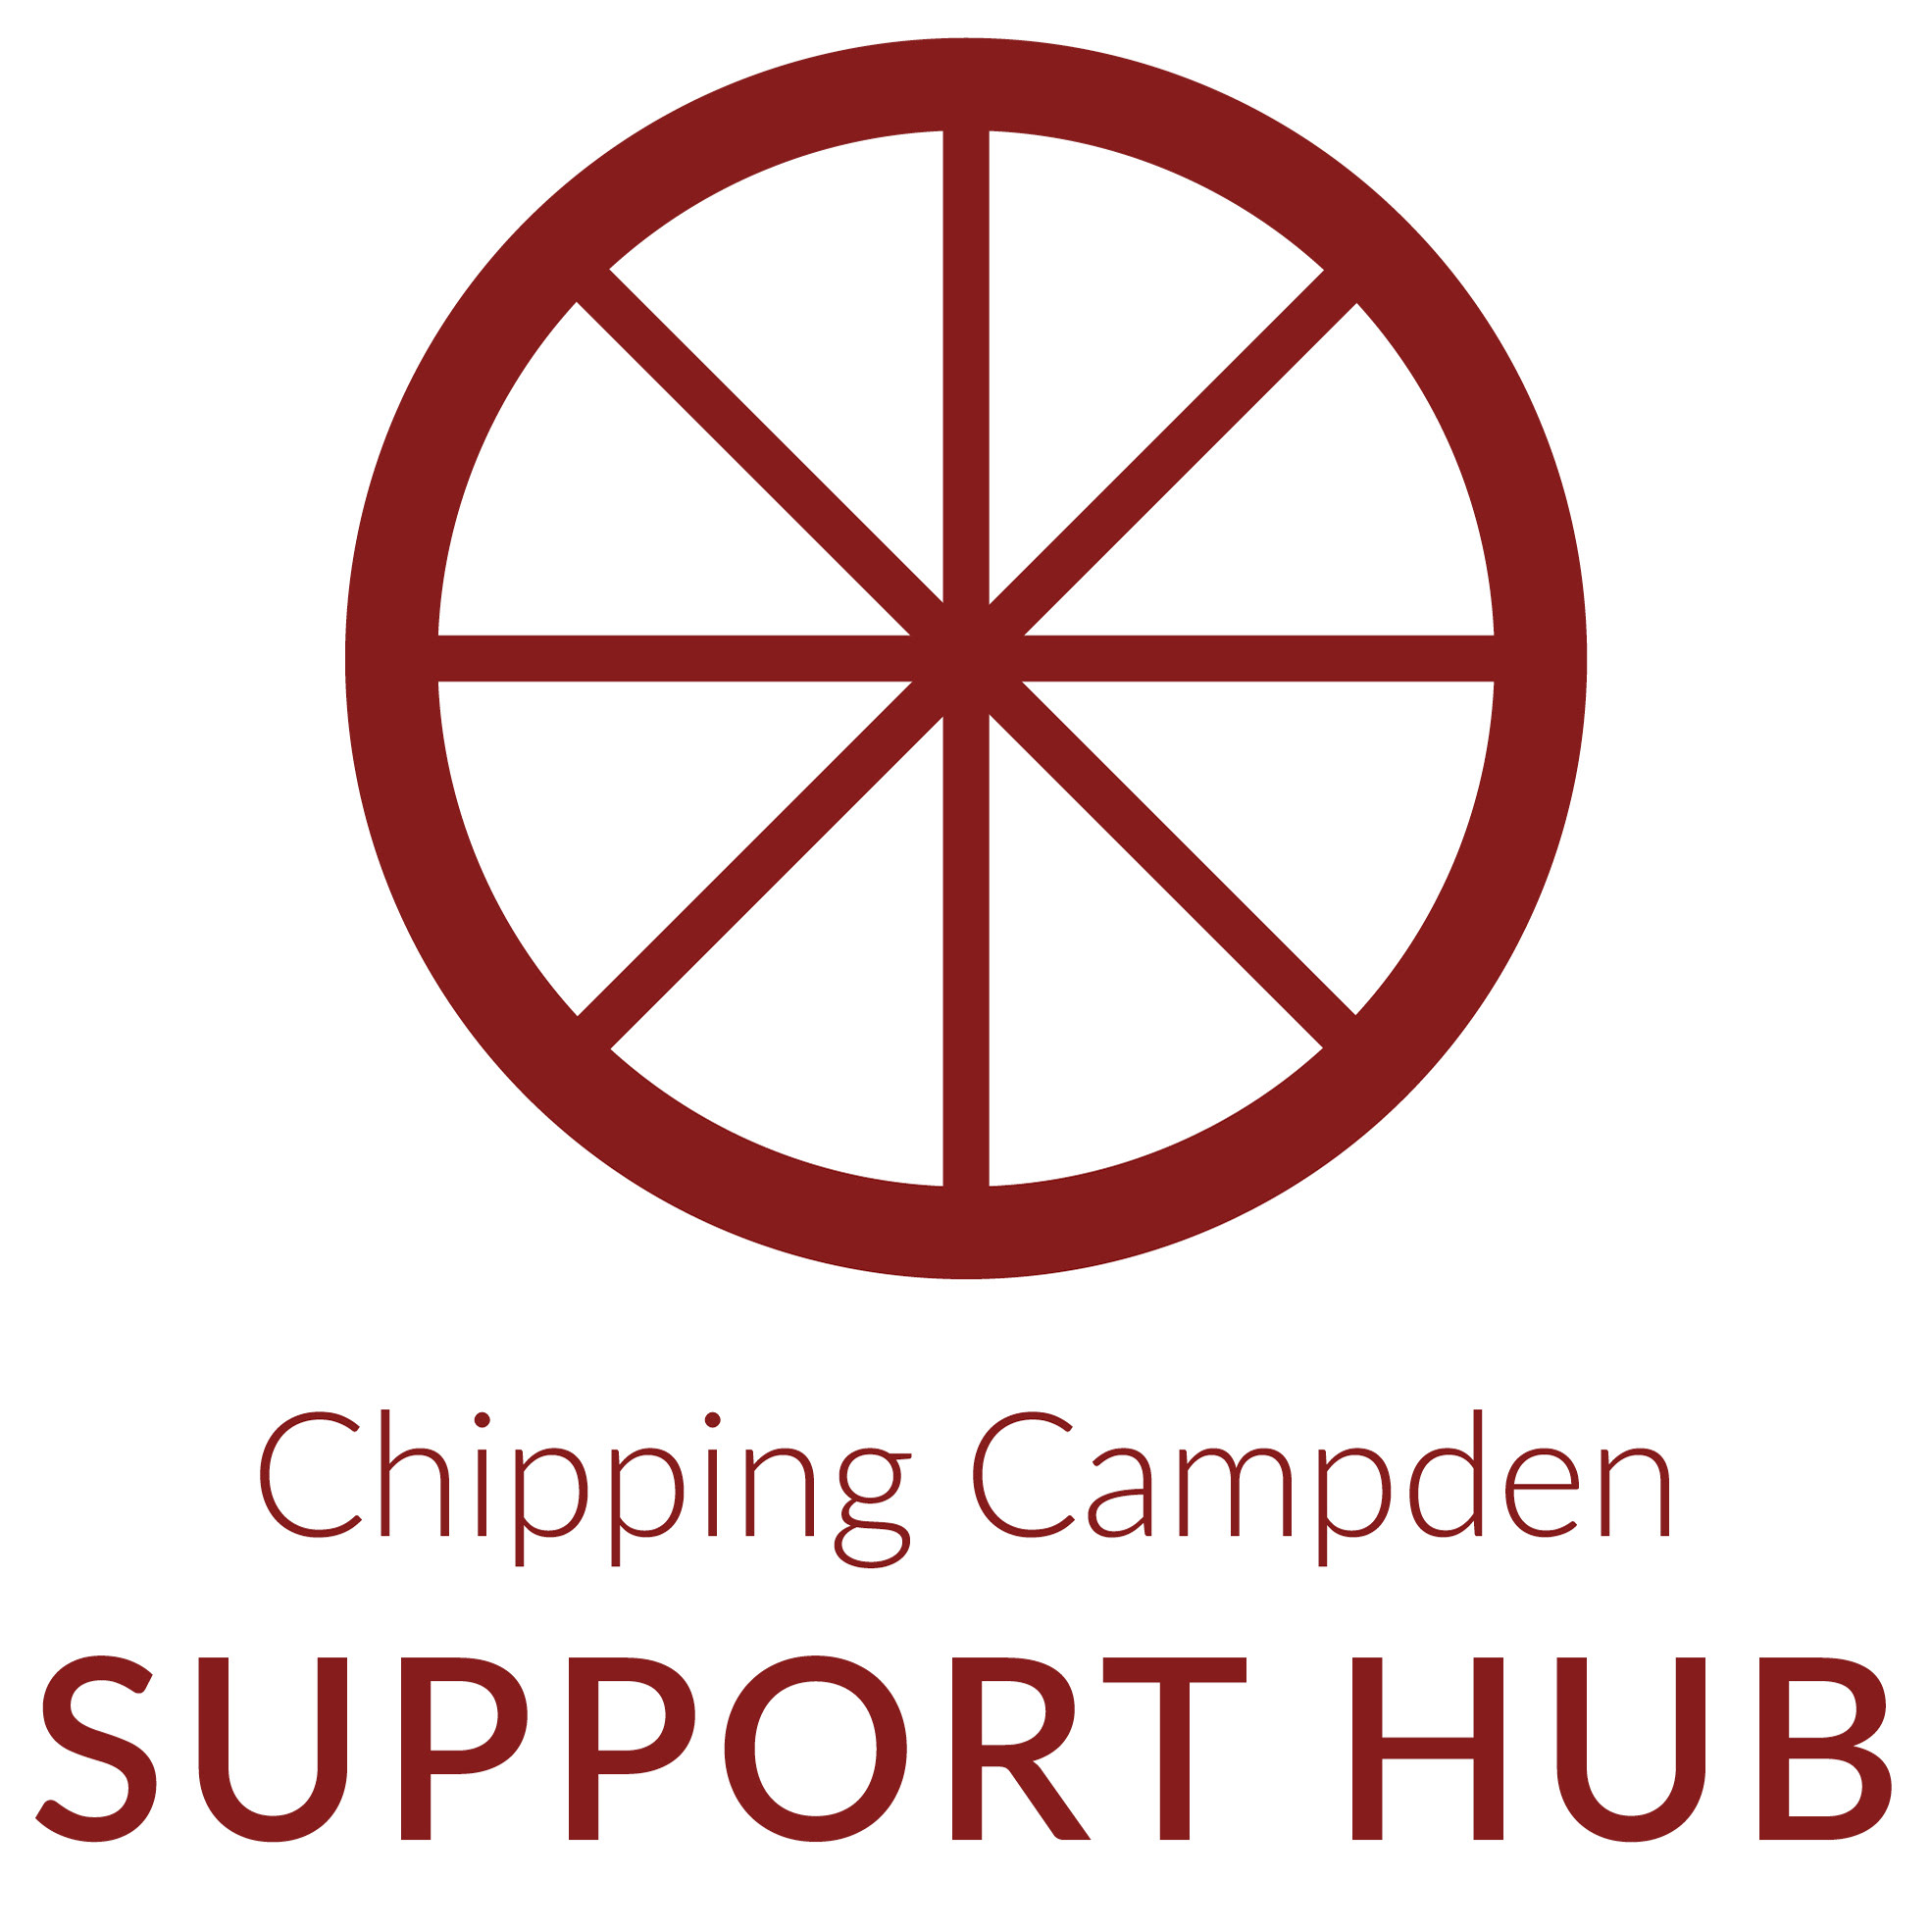 Chipping Campden Support Hub